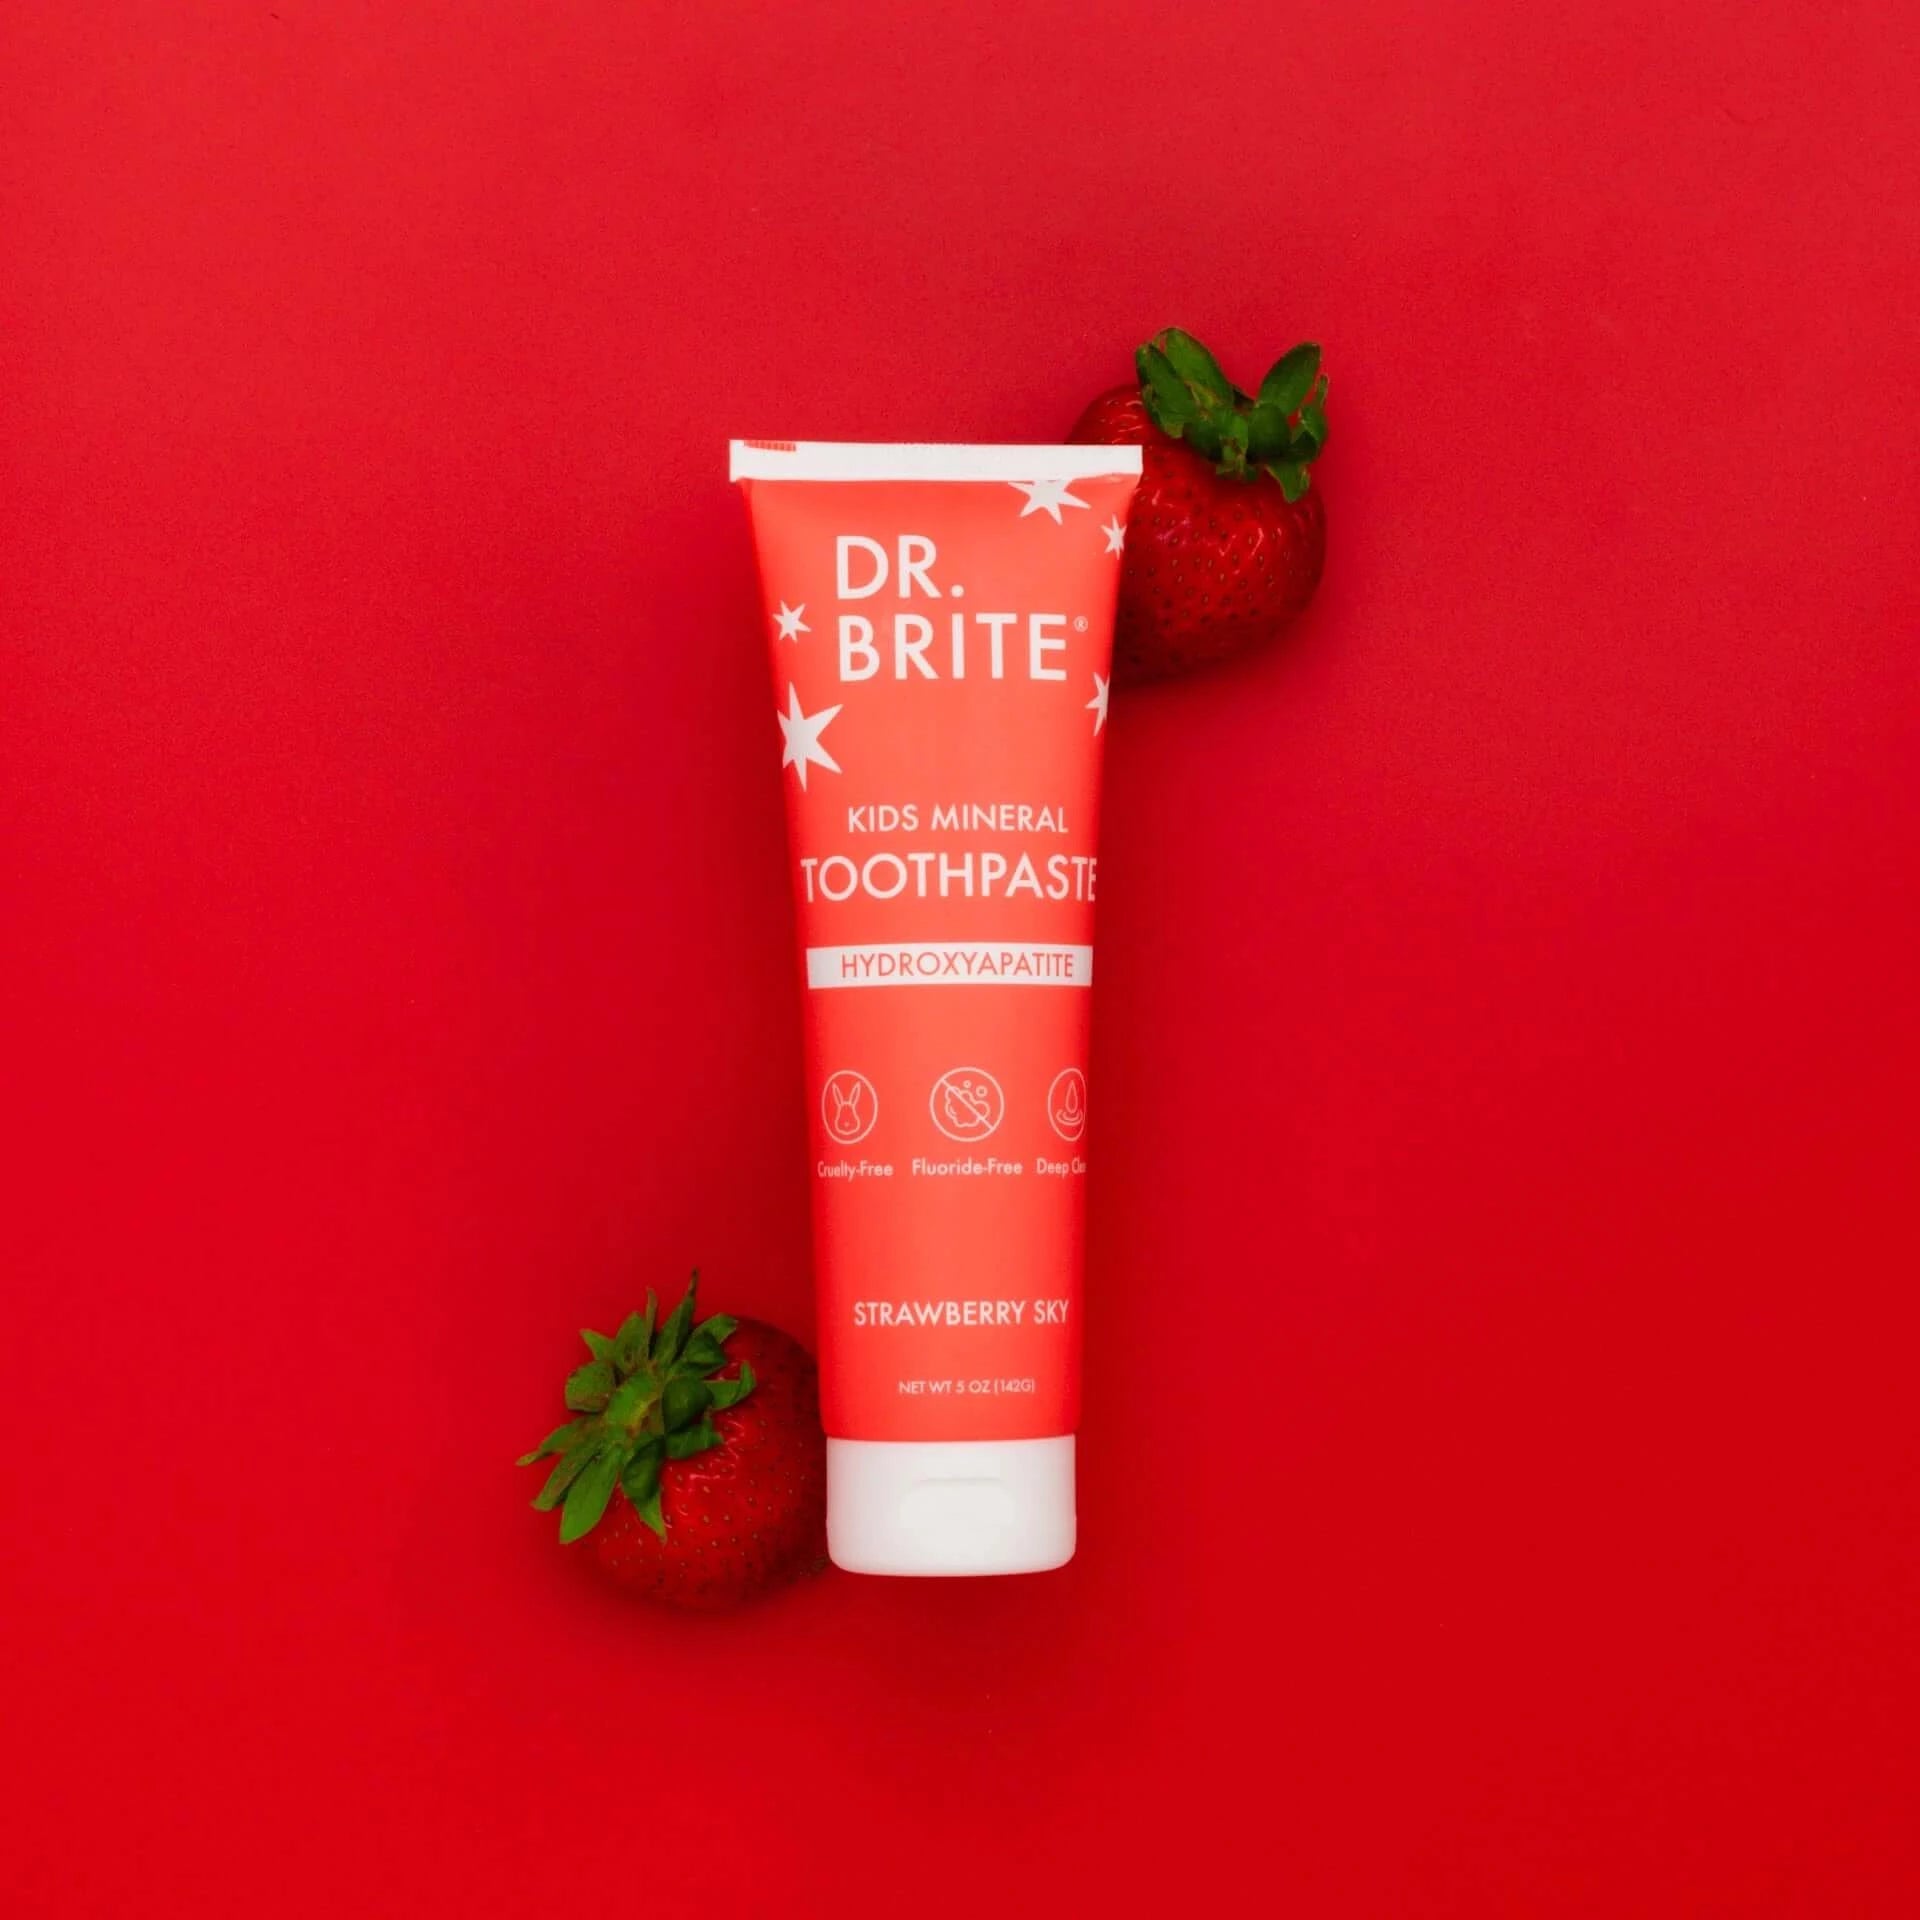 Dr Brite Kids Mineral Toothpaste - Strawberry Sky